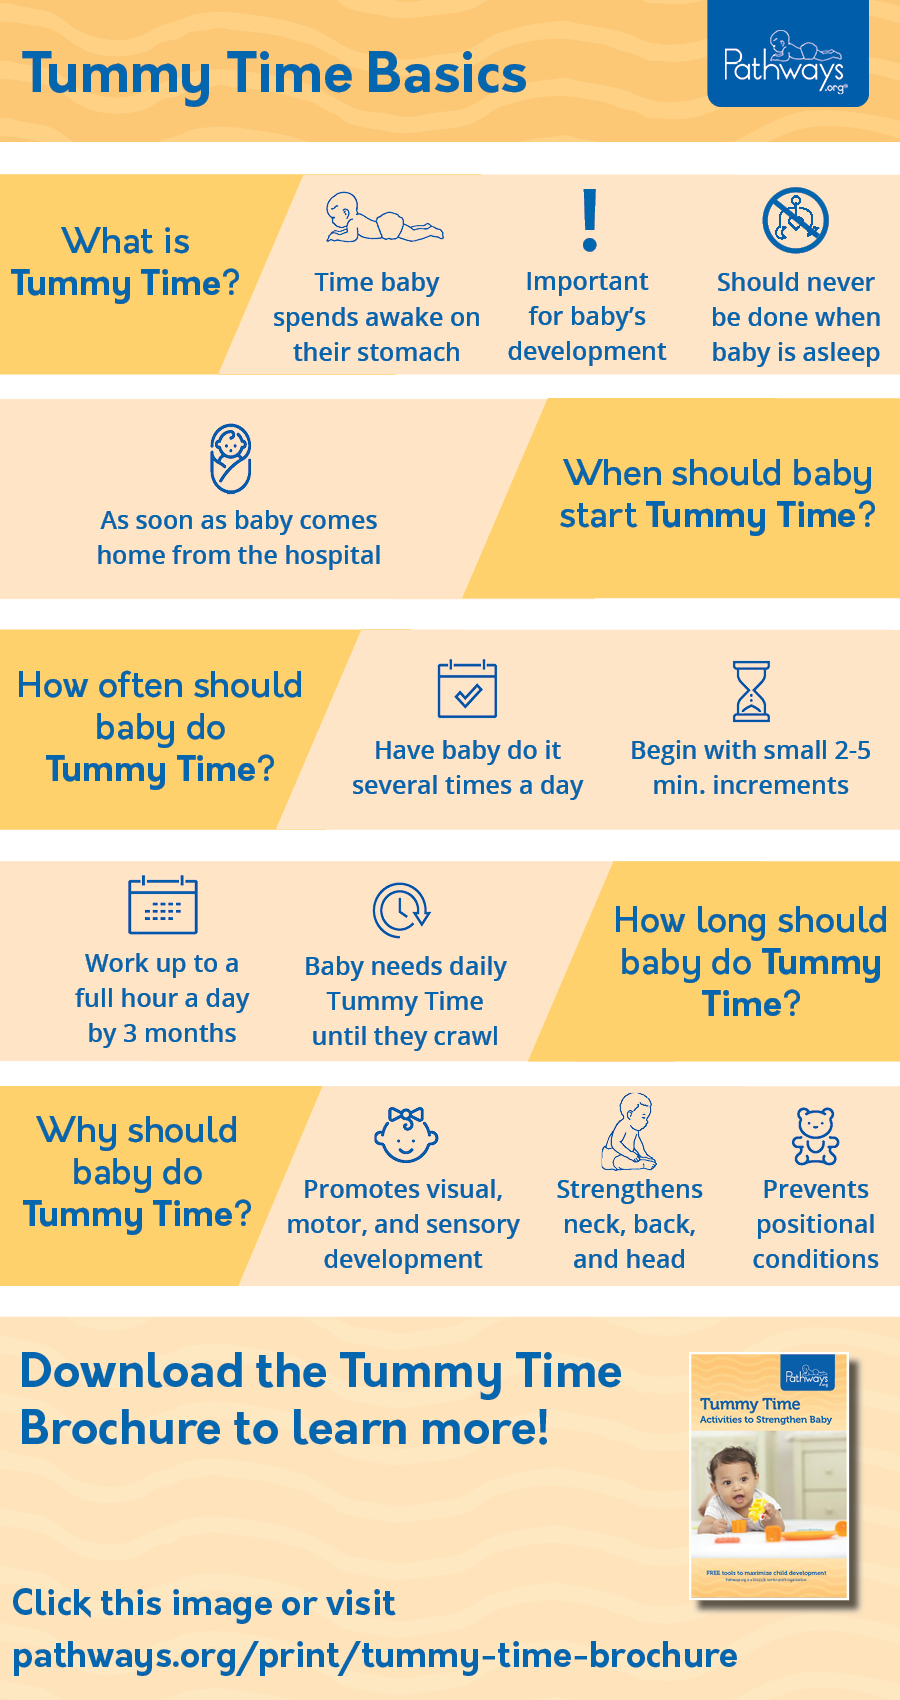 daily activities for a 5 month old